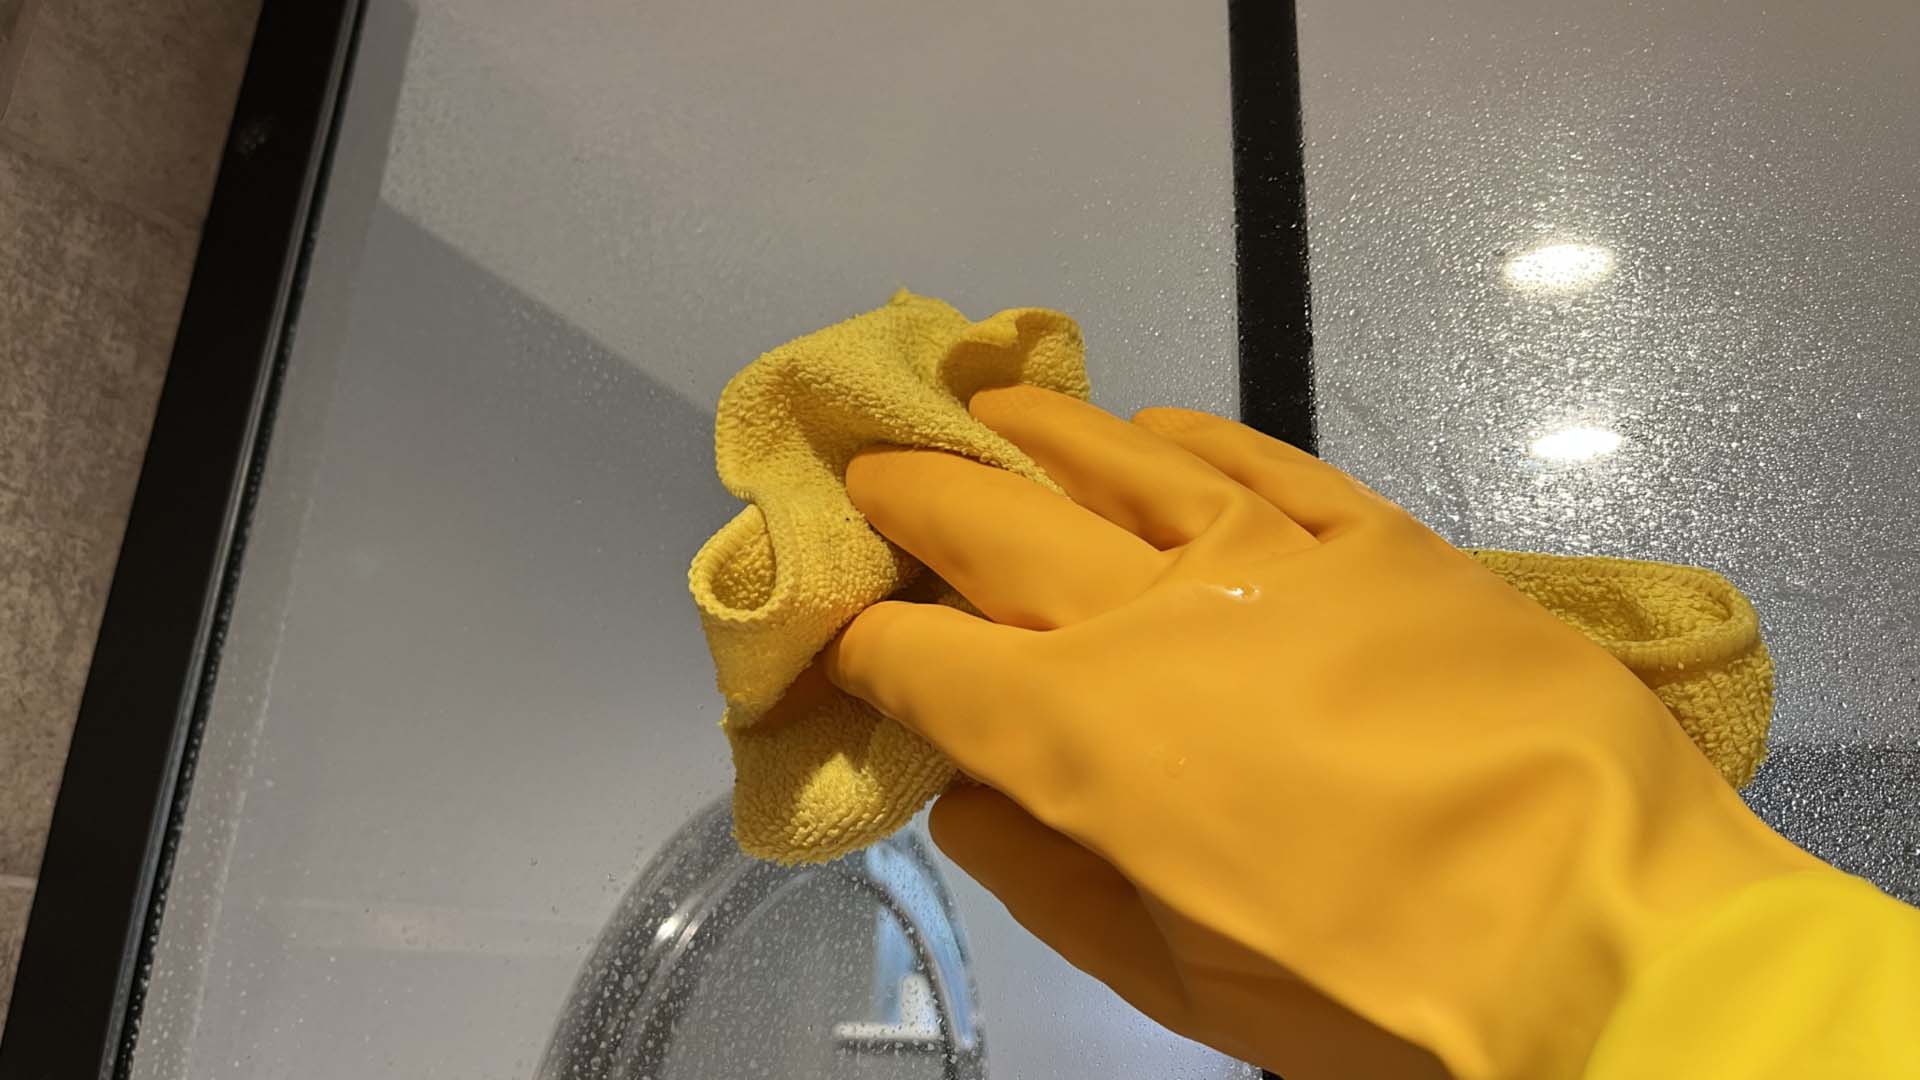 A hand wearing cleaning gloves wiping a mirror